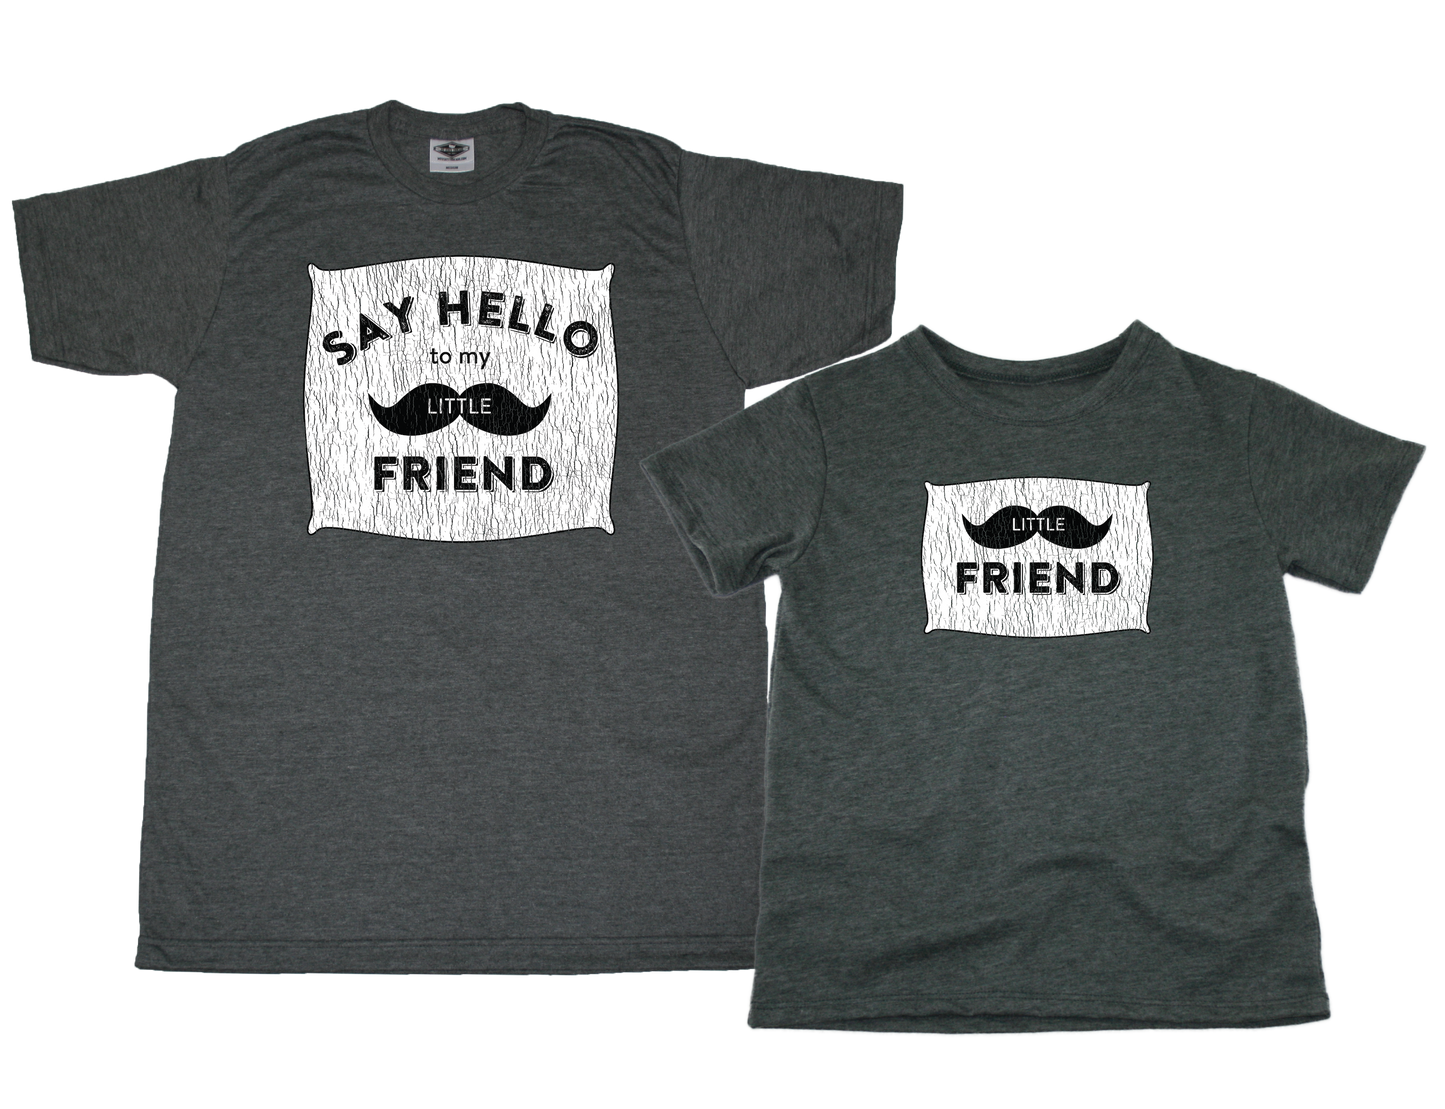 SAY HELLO TO MY LITTLE FRIEND | MATCHING TEE SET